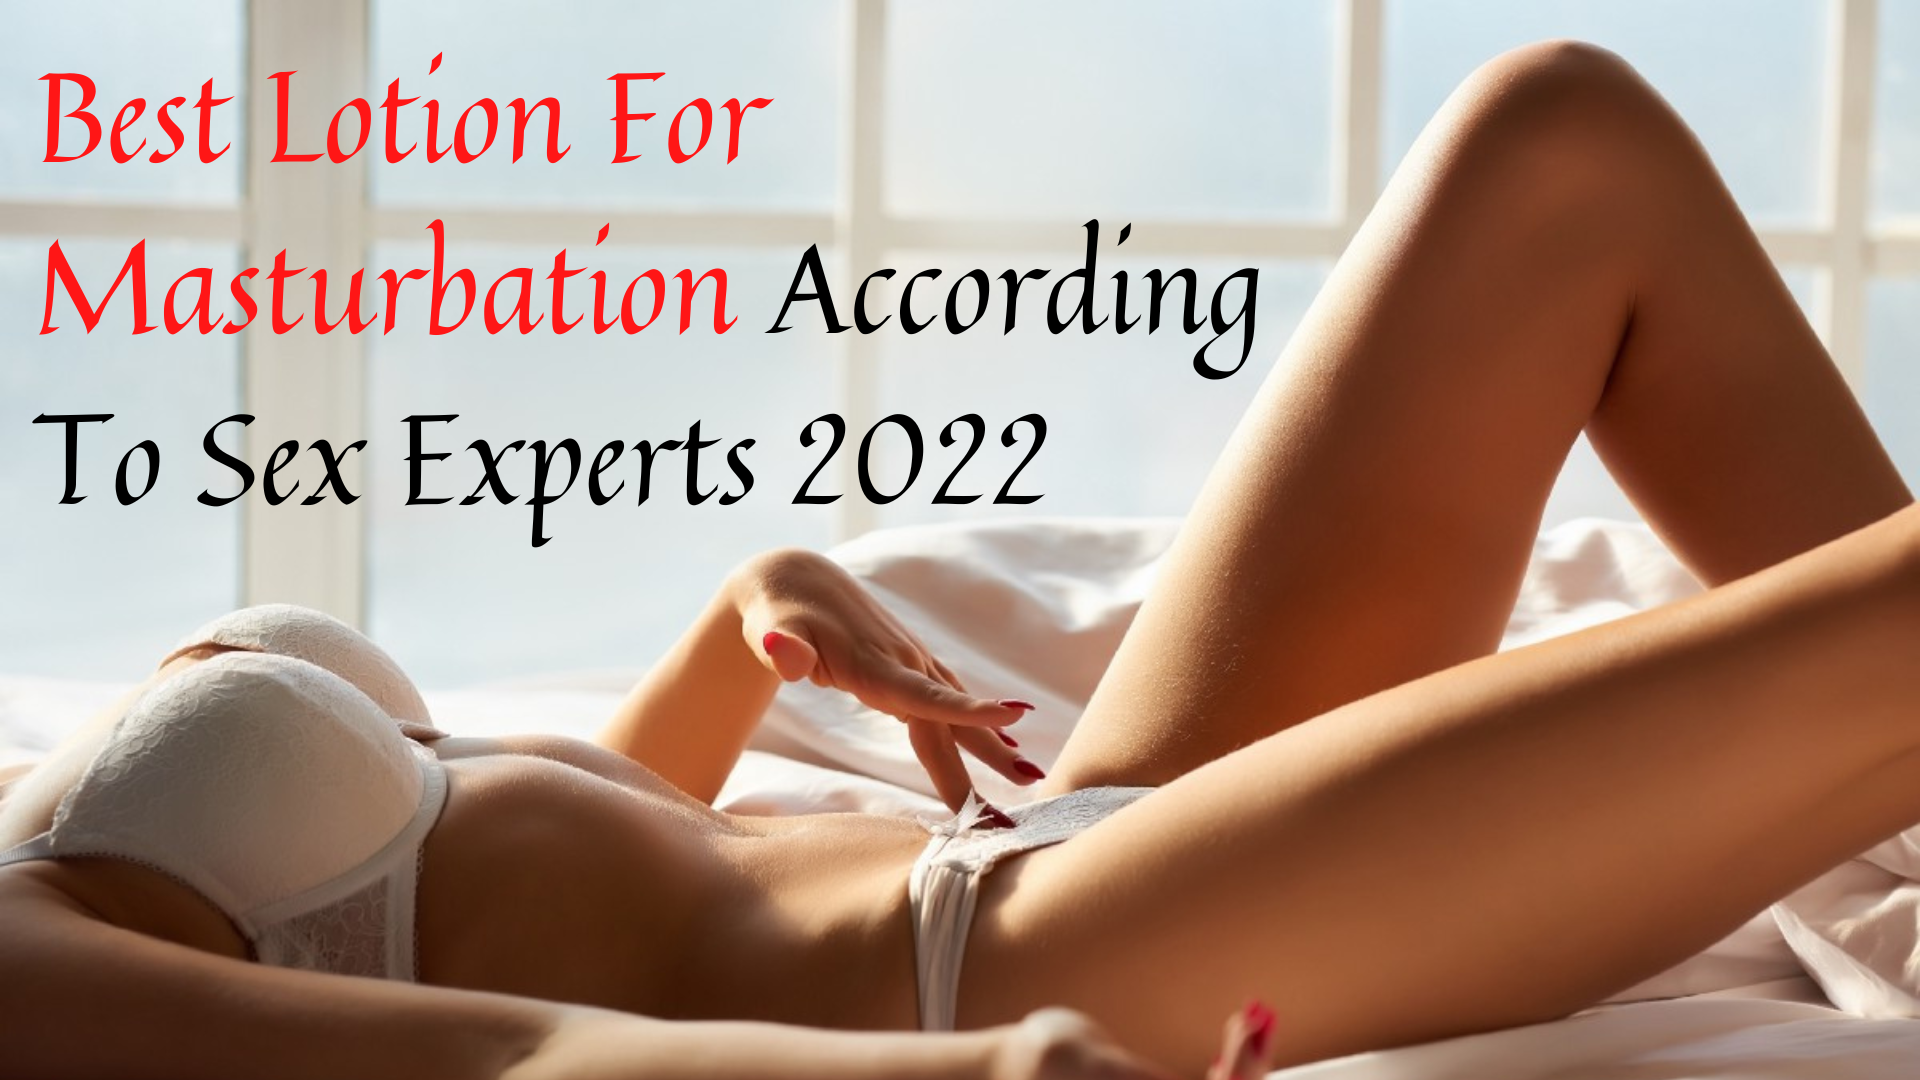 Best Lotion For Masturbation In 2023 - According To Sex Experts